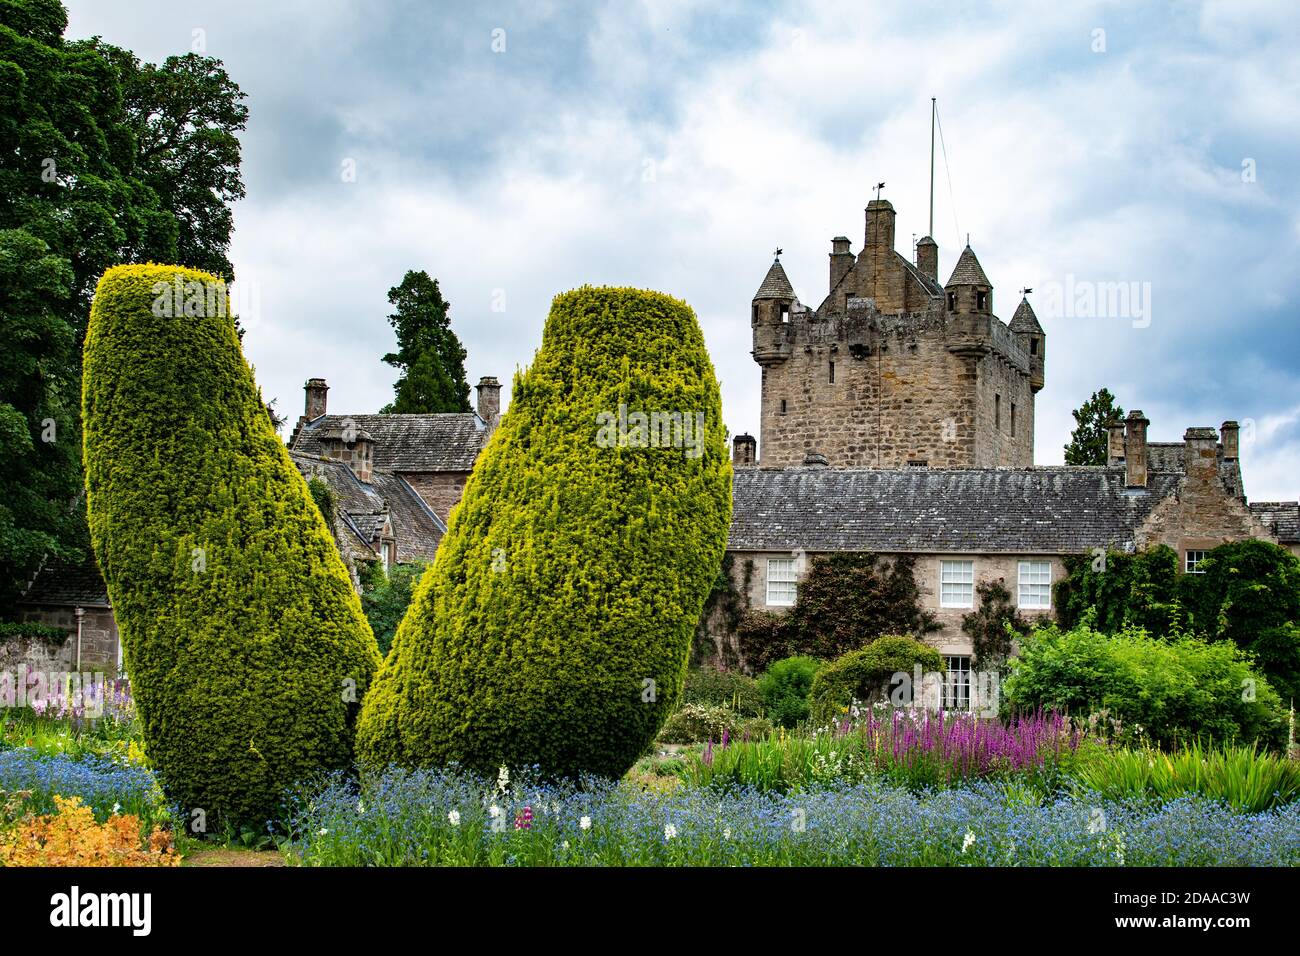 An image of the beautiful gardens of Cawdor castle with the stunning castle in the background. Stock Photo